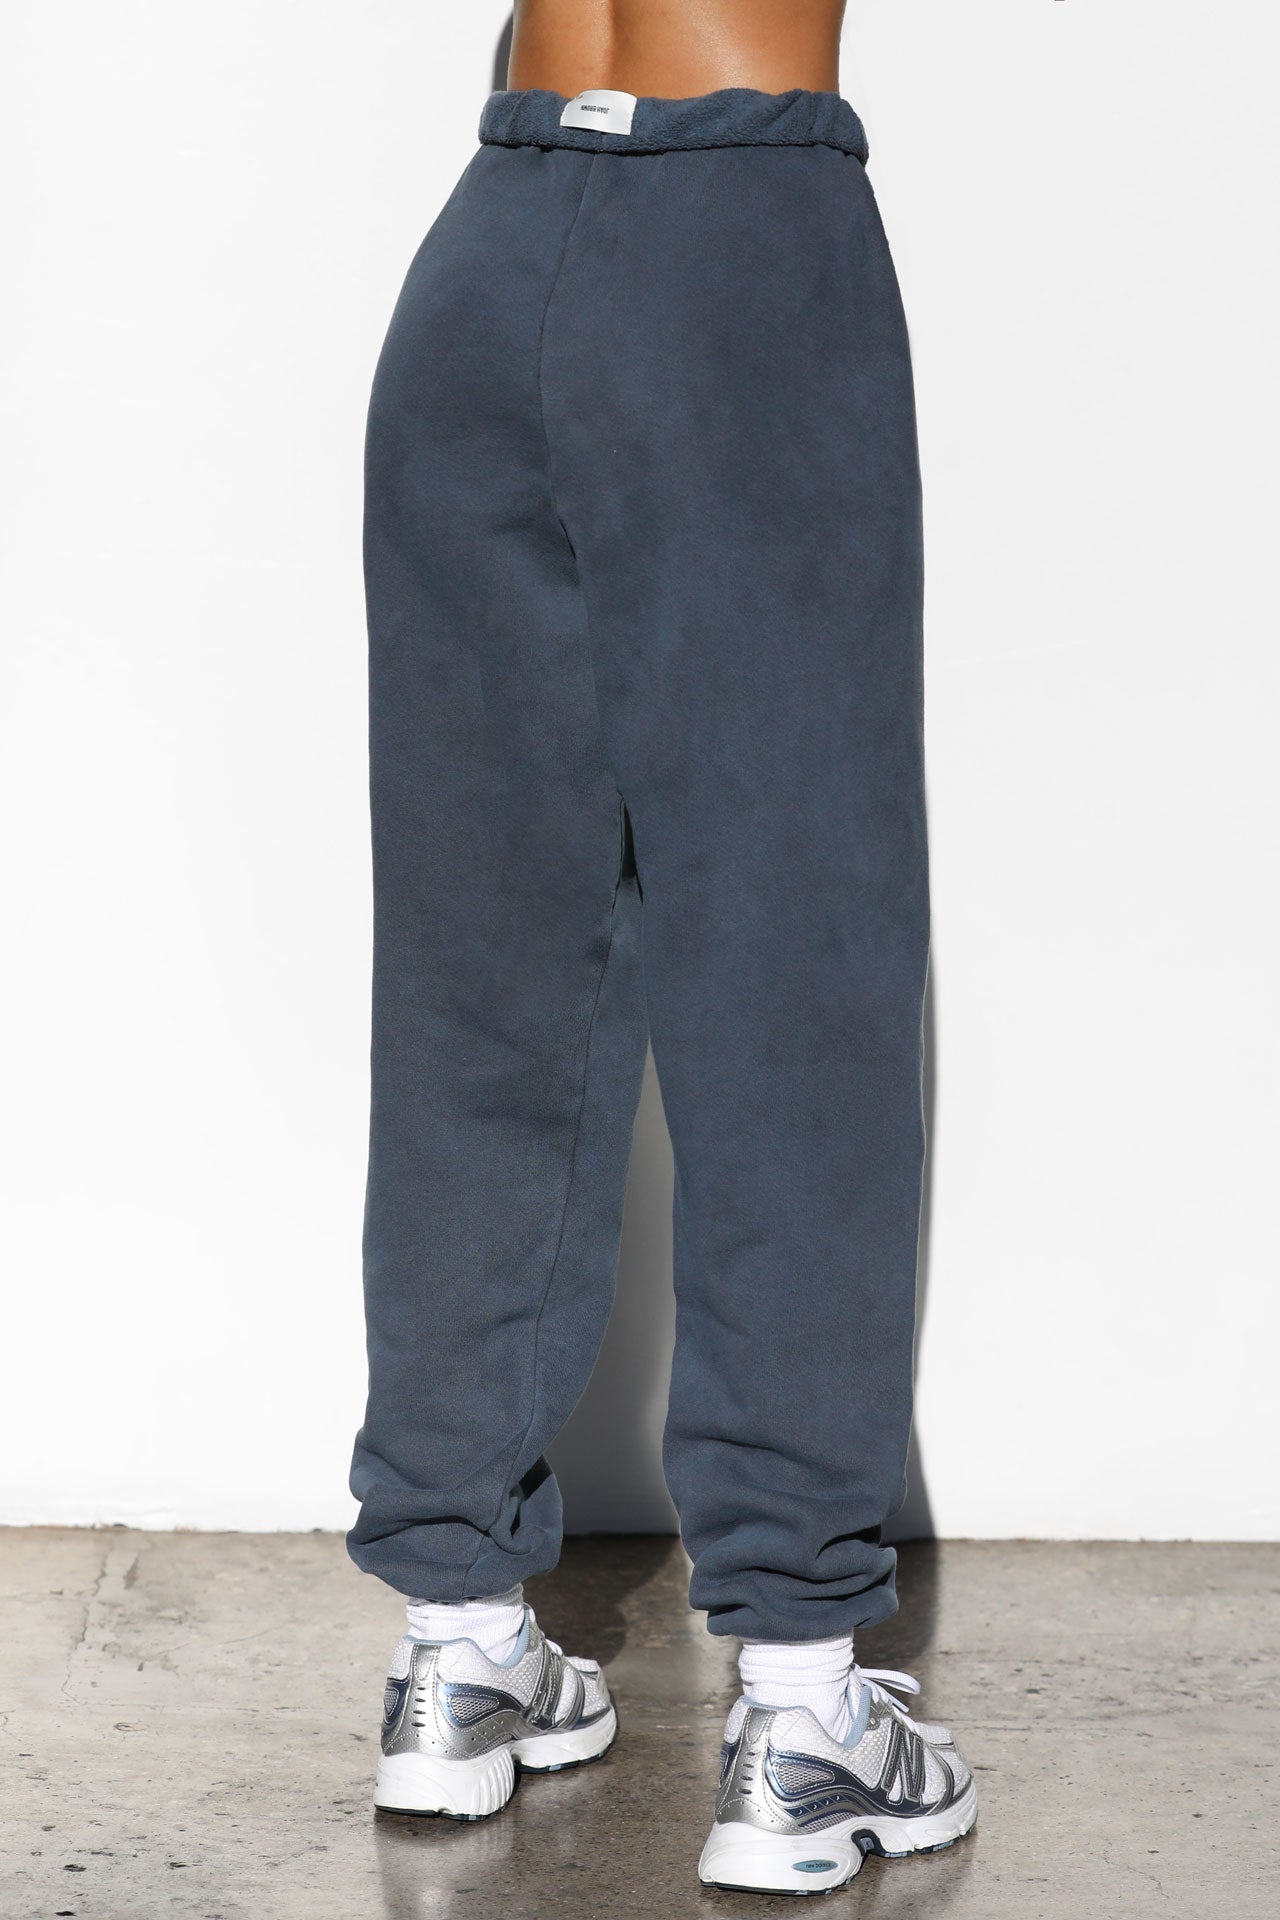 Back view of model from the waist down wearing the oversized loose fit washed navy french terry Oversized Jogger with an elastic waistband and ankle cuffs